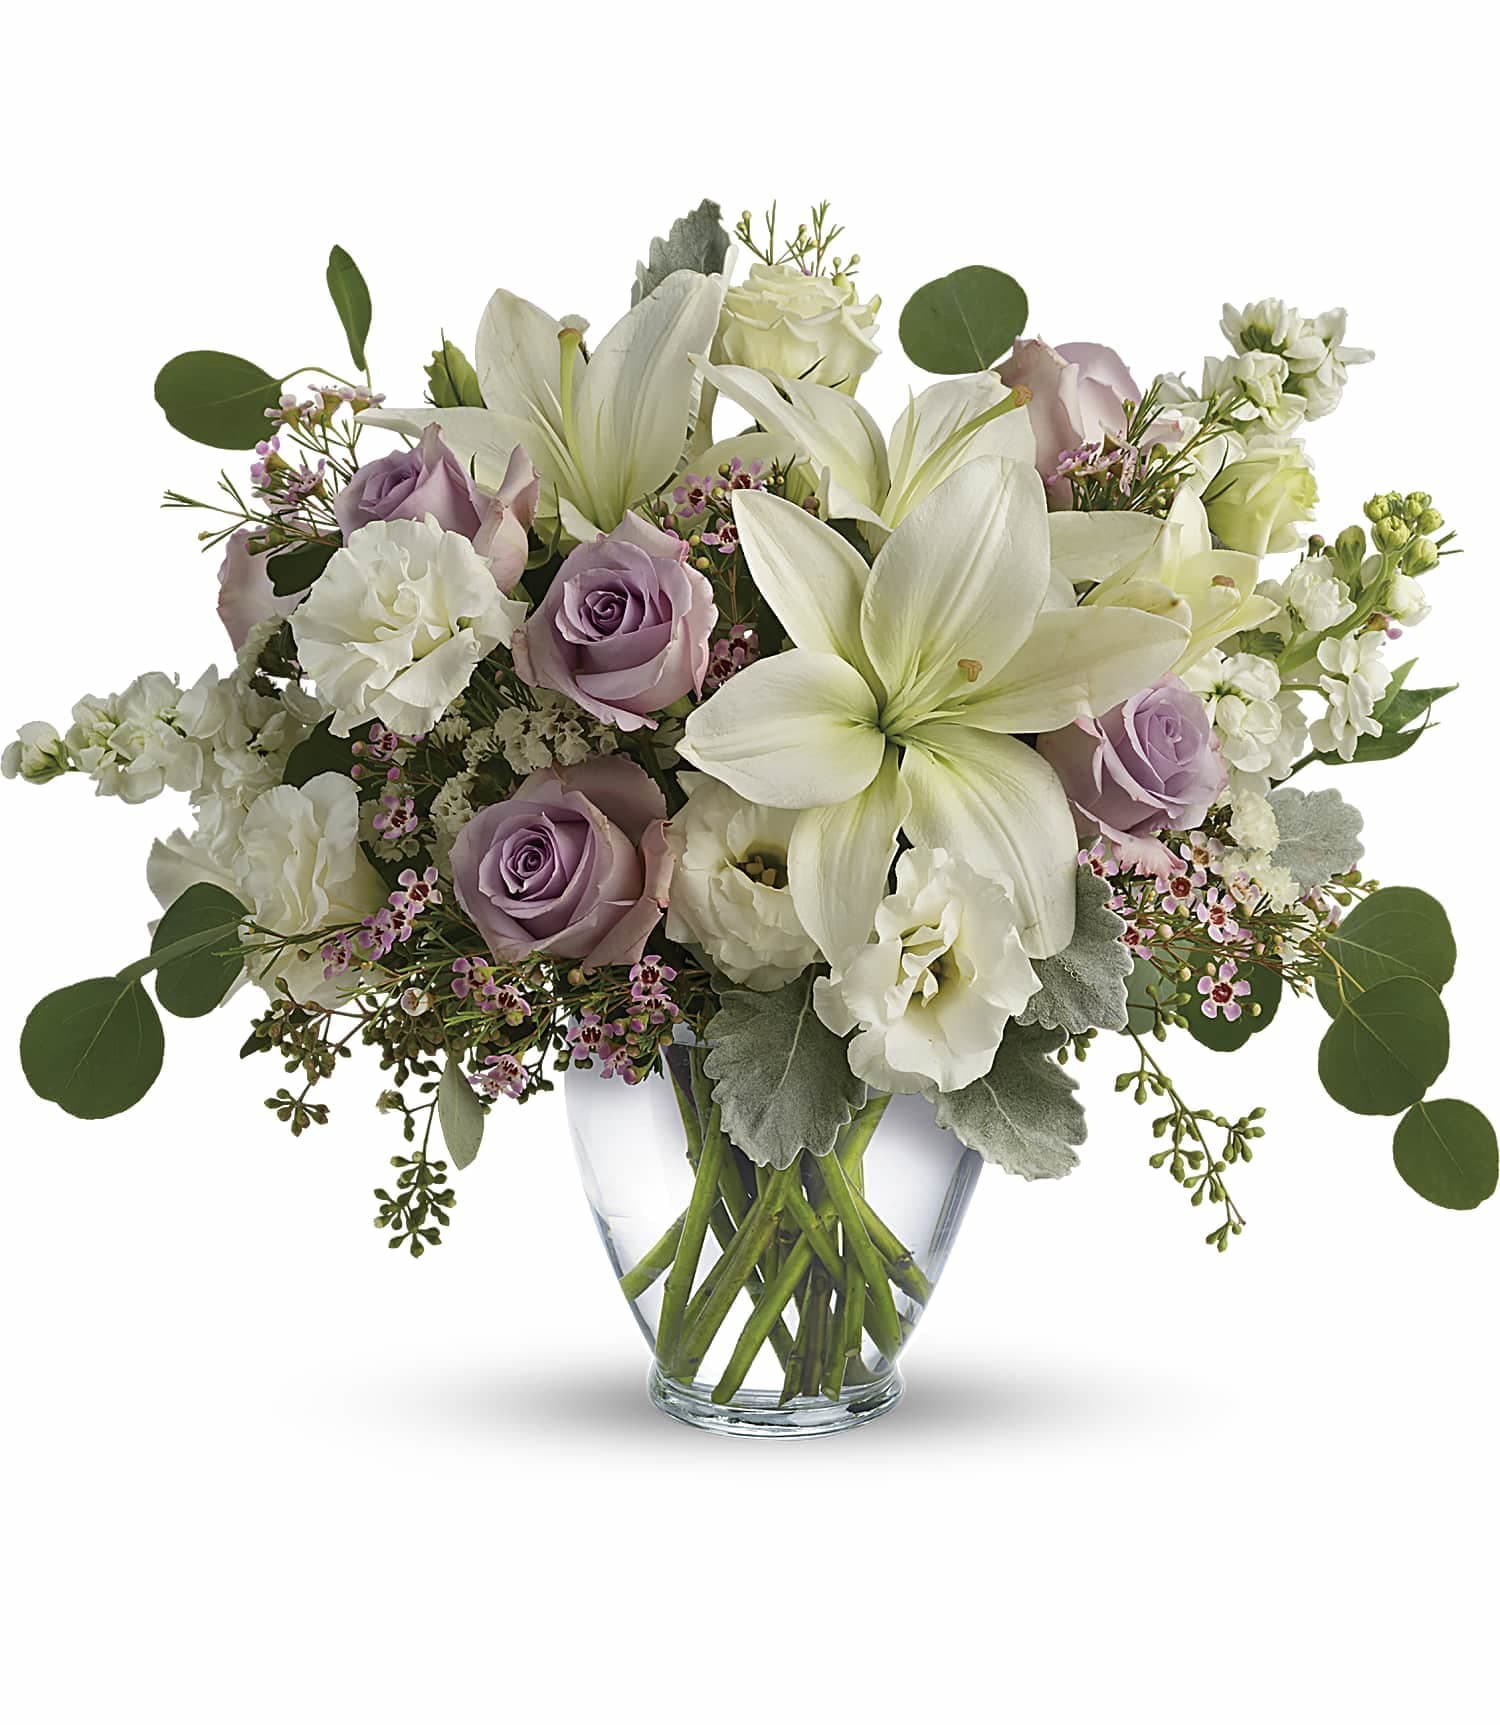 Lovely Luxe Bouquet - Pamper your lovely with this luxurious lavender and cream bouquet! Ravishing roses, fragrant lilies and delicate lisianthus create a chic, sweet surprise they'll never forget. 